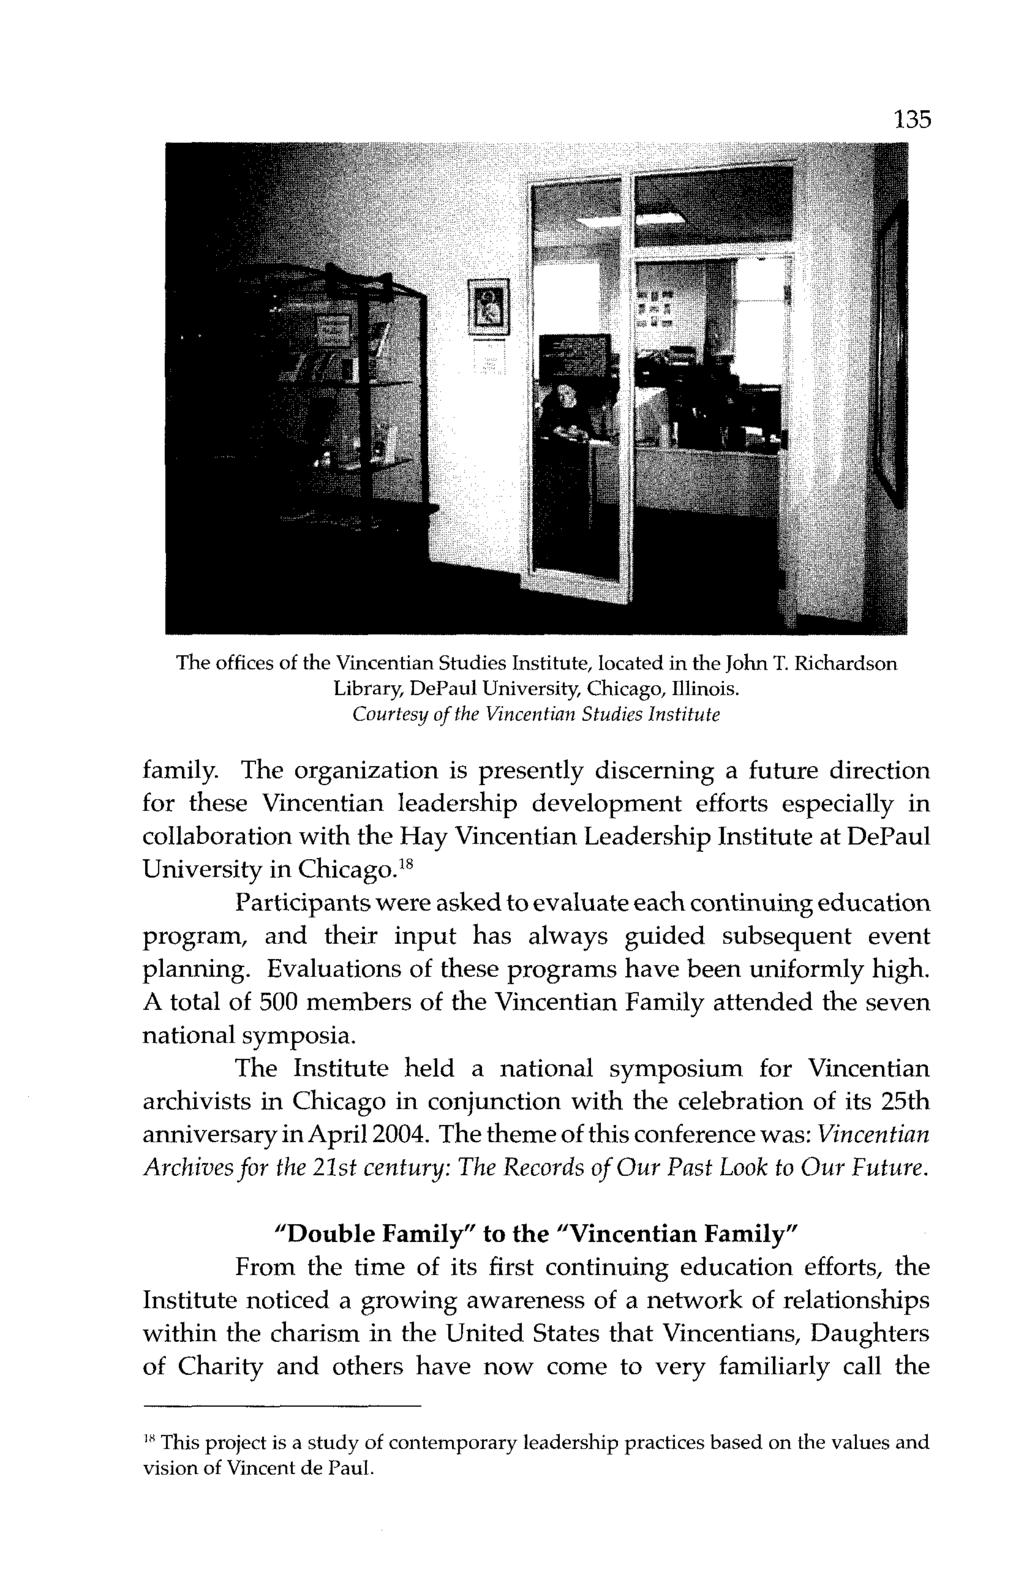 135 The offices of the Vincentian Studies Institute, located in the John T. Richardson Library, DePaul University, Chicago, Illinois. Courtesy ofthe Vincentian Studies Institute family.